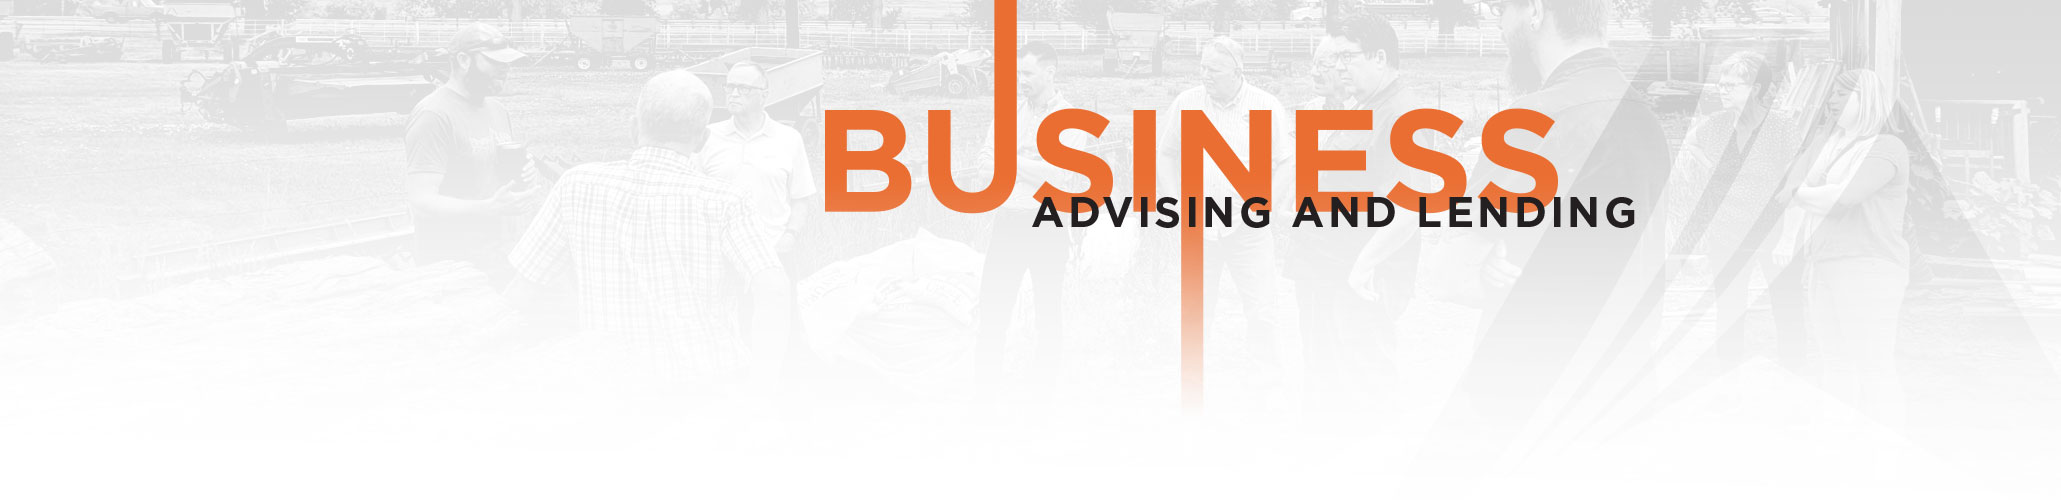 Business Advising and Lending